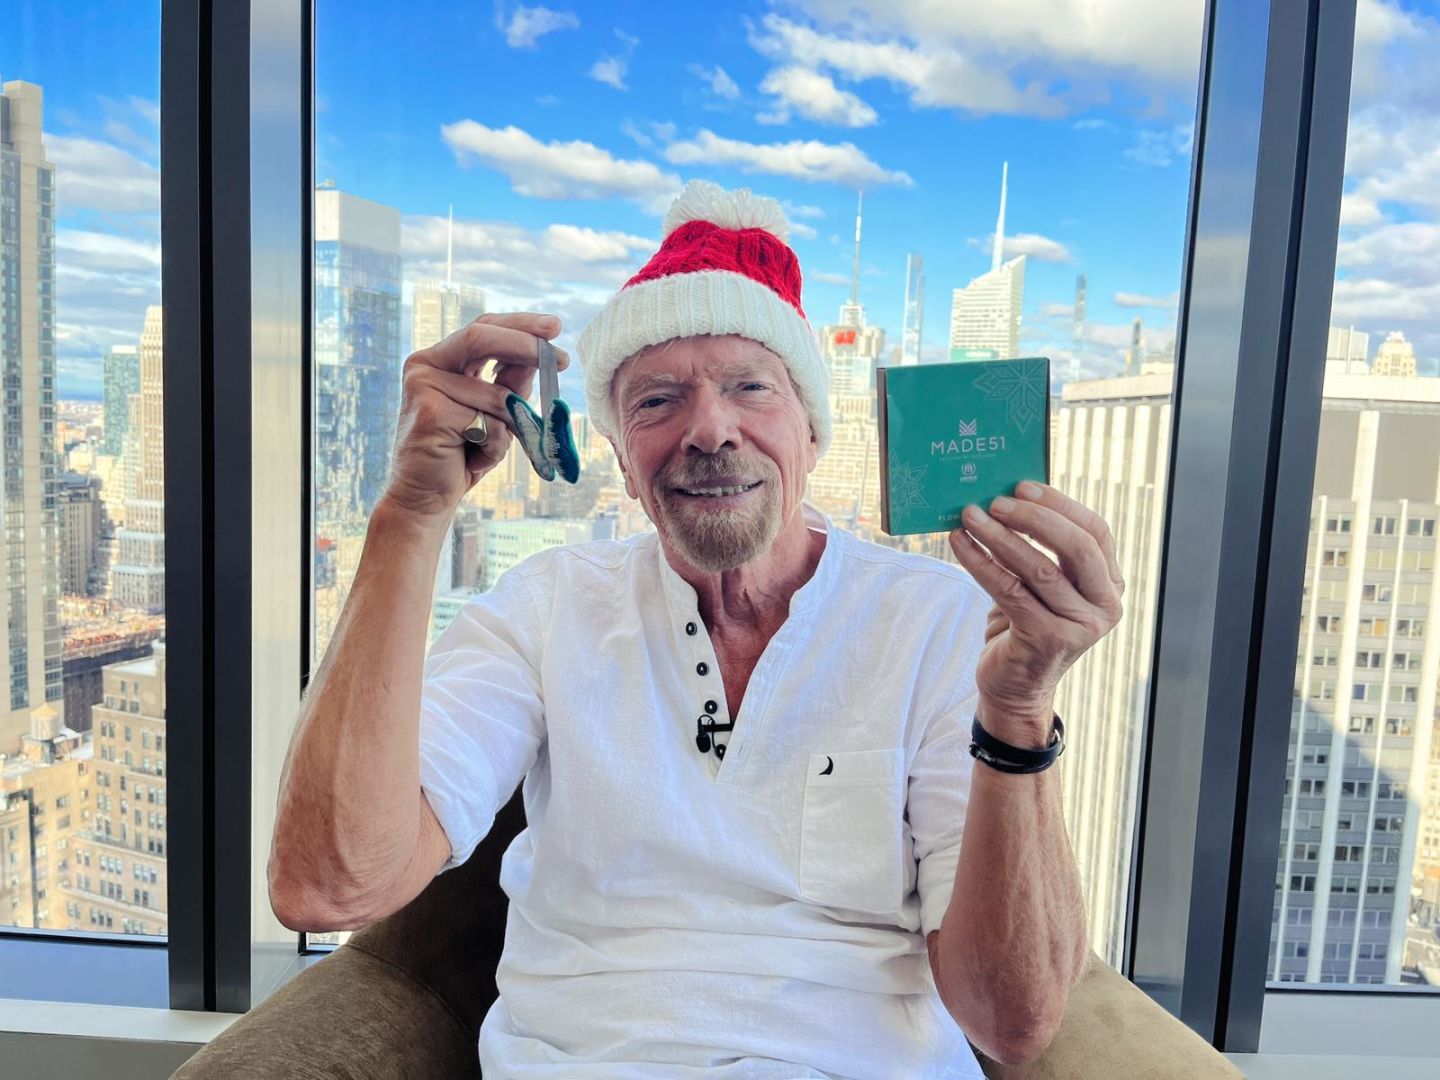 Richard Branson holding up Made51 Christmas ornaments made by refugees